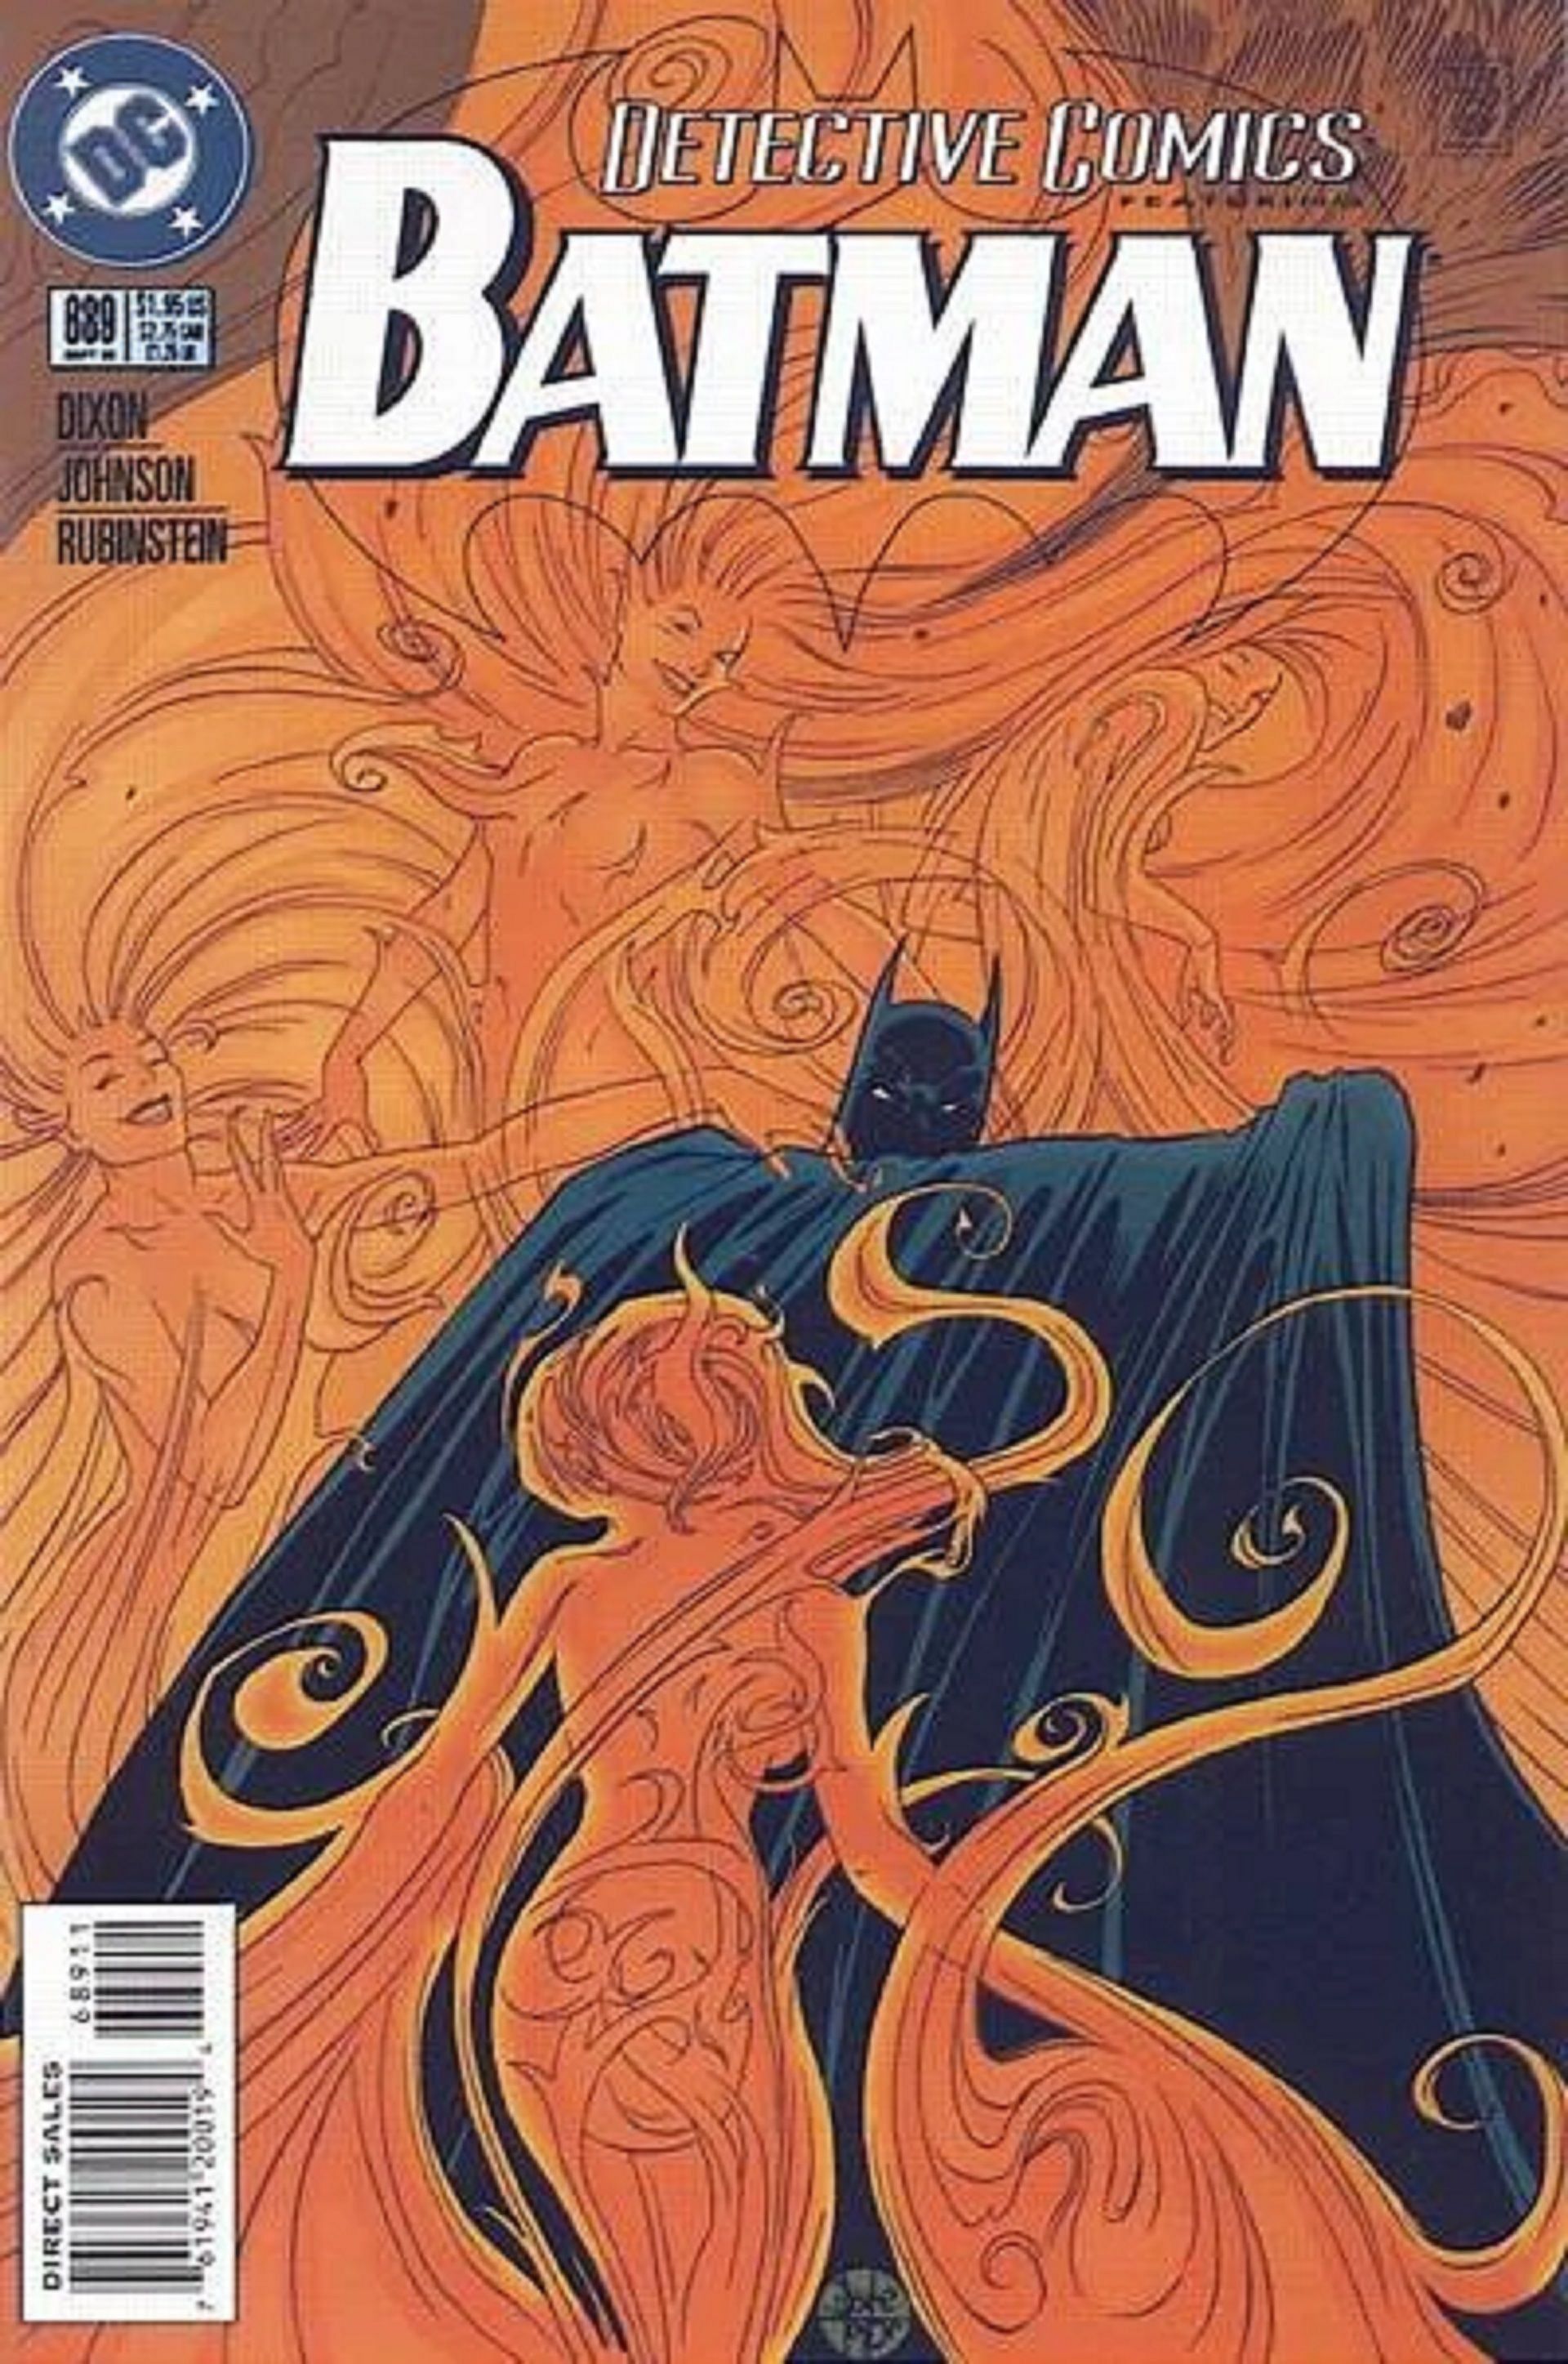 Detective Comics #689 was published in 1995 (Image via DC)